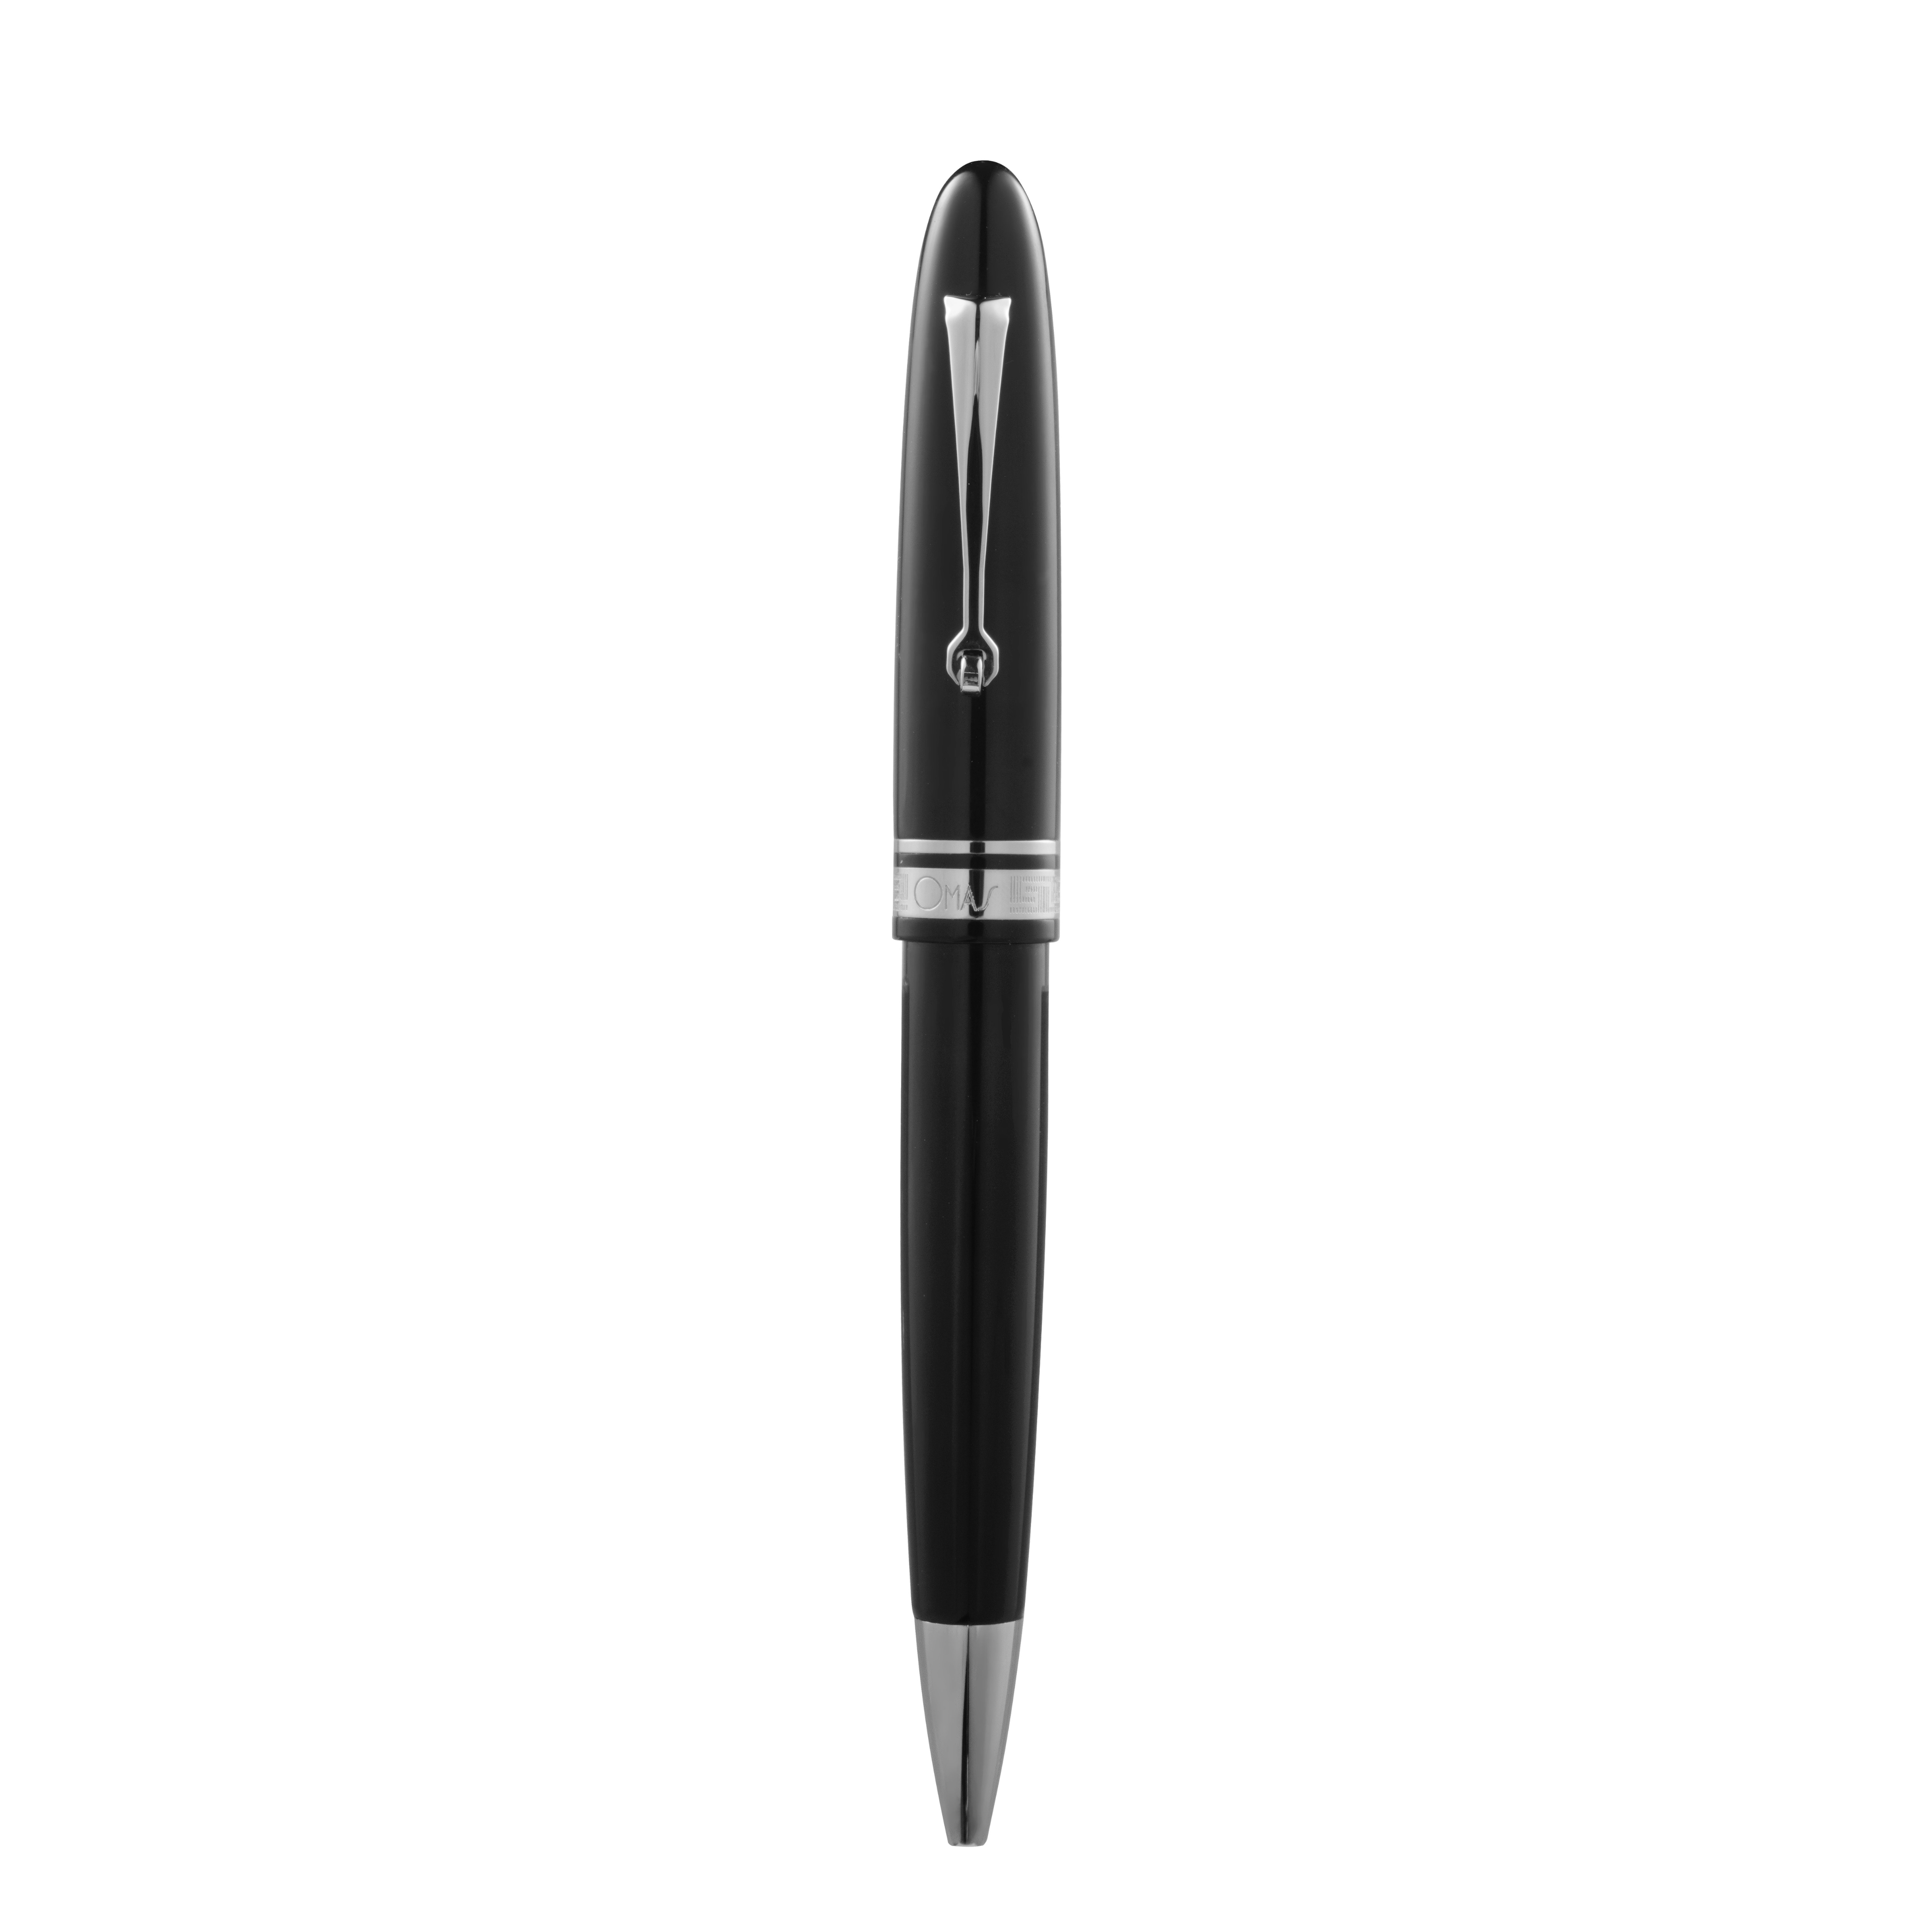 Omas Ogiva Ballpoint Pen in Nera with Silver Trim